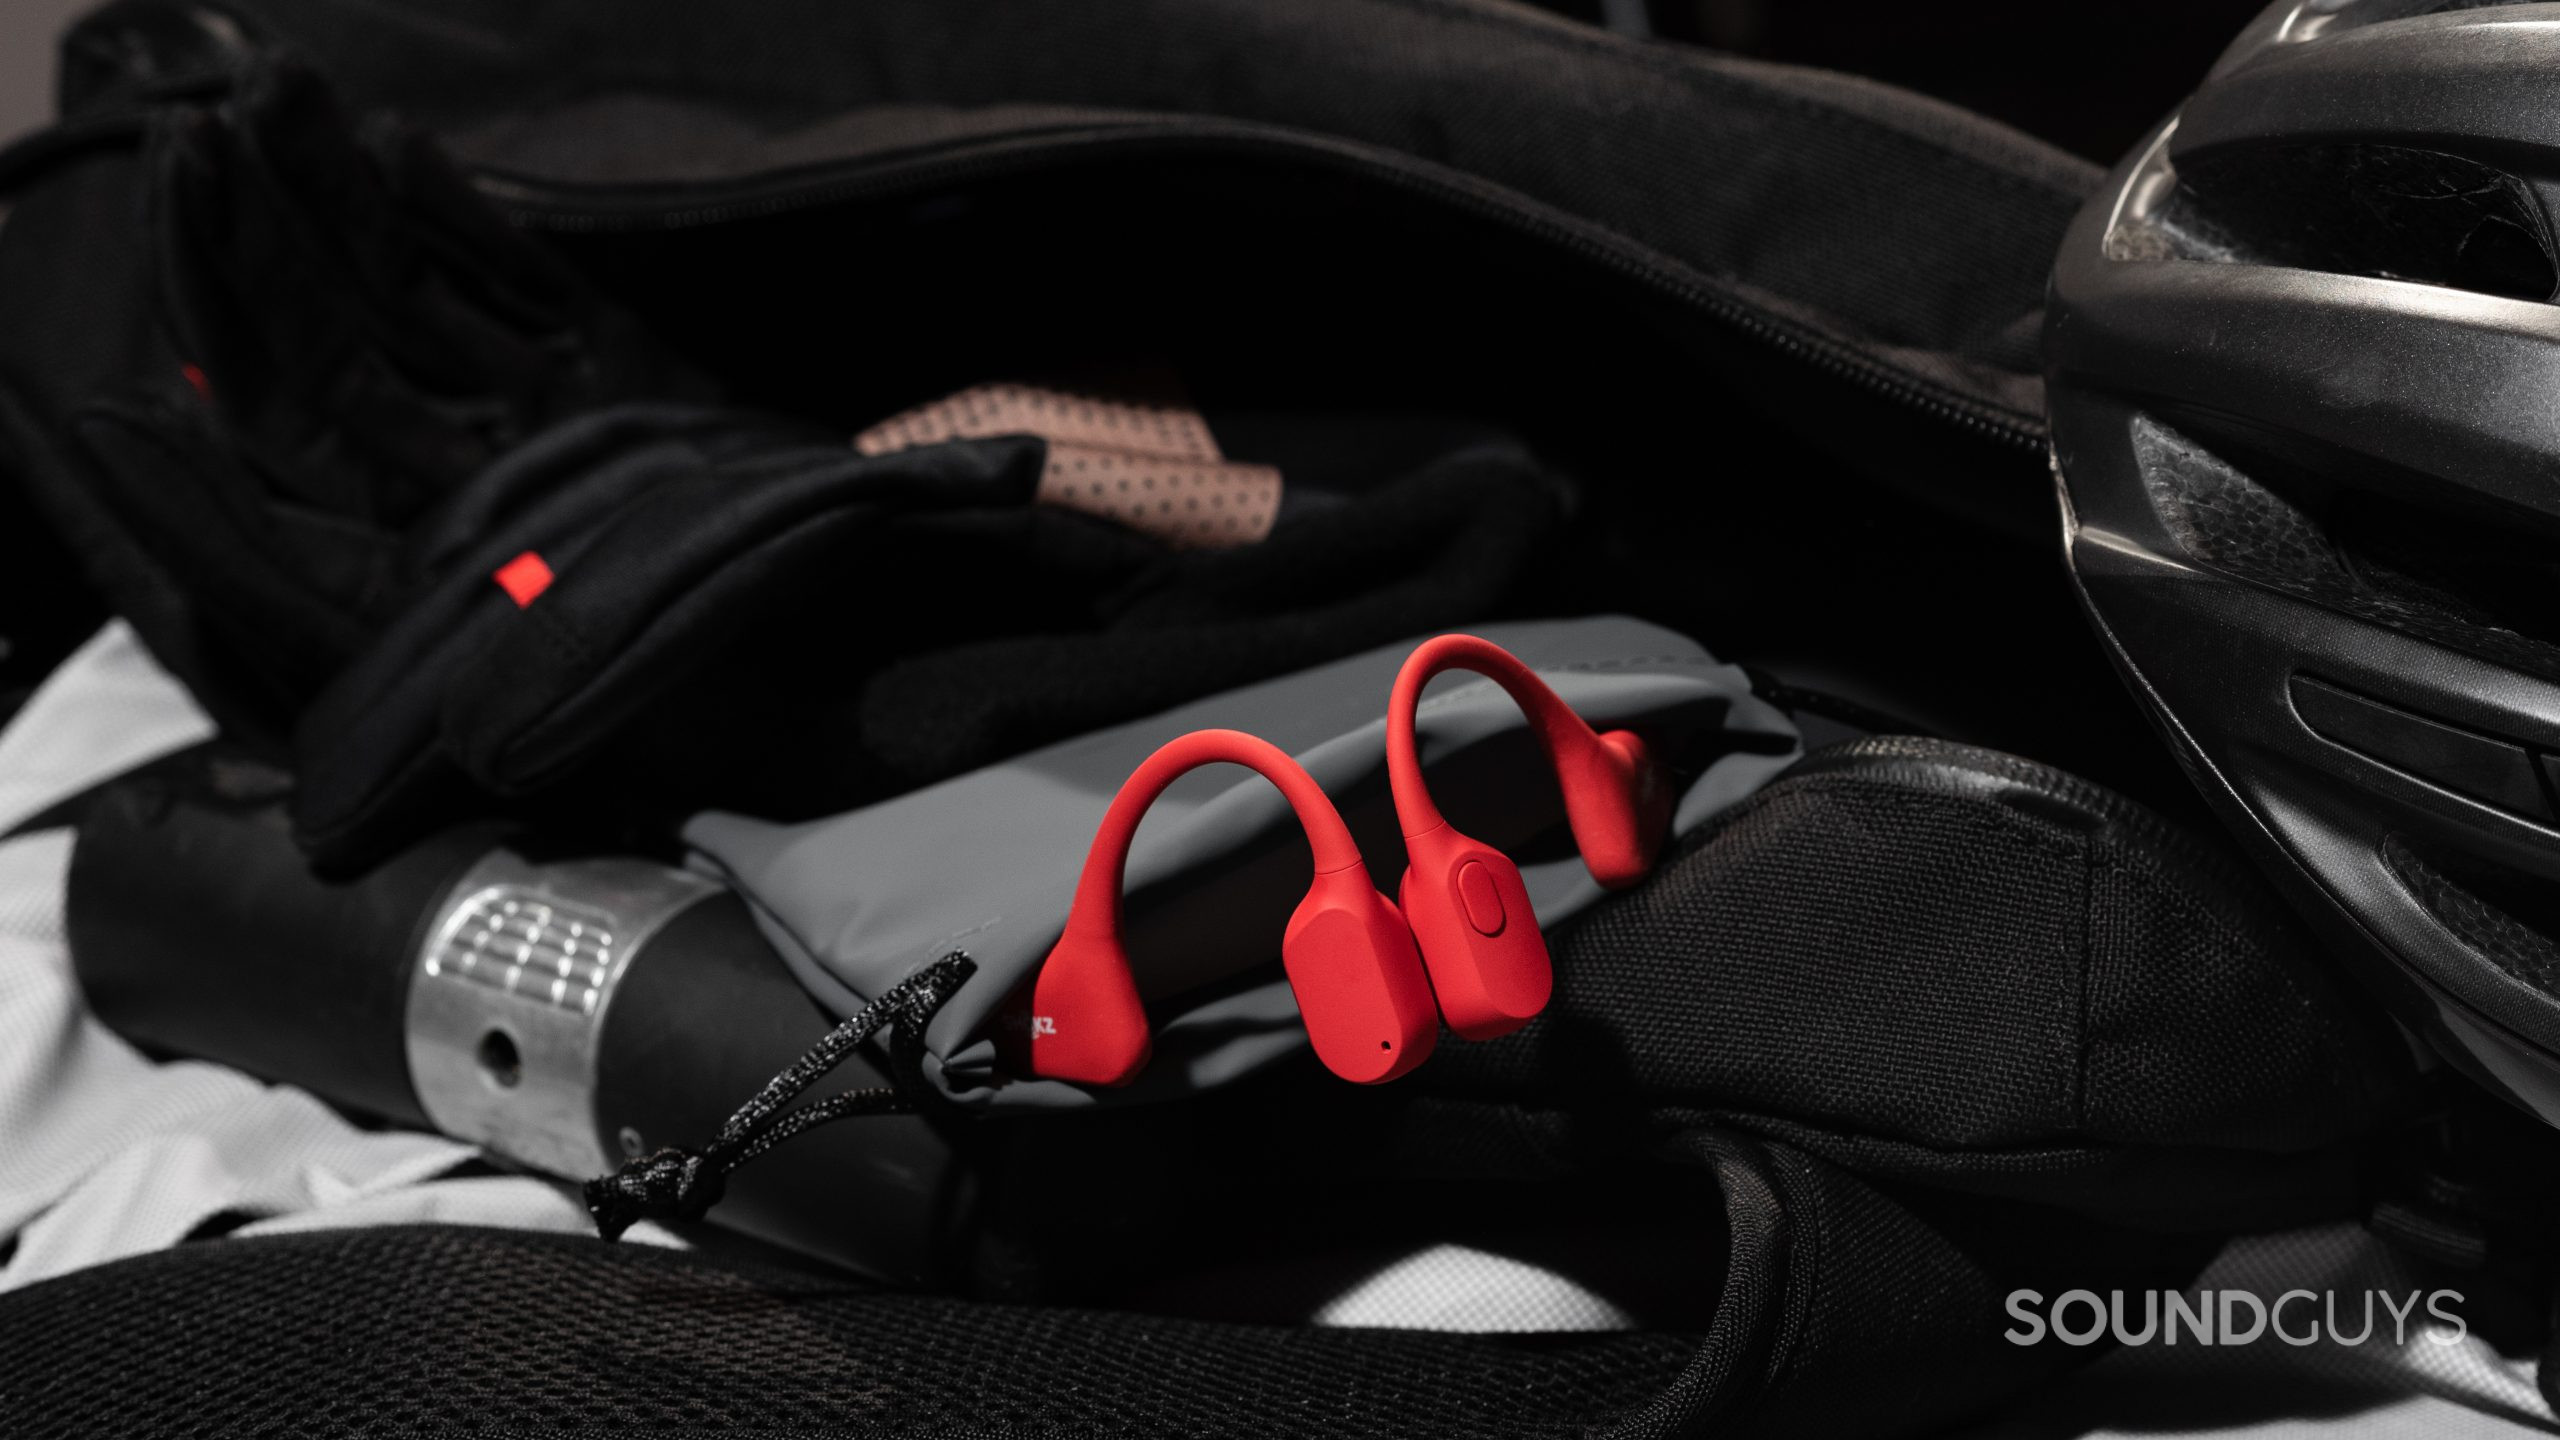 The Shokz OpenRun bone conduction headphones rest in the drawstring carry pouch inside of a sling bag near biking accessories.